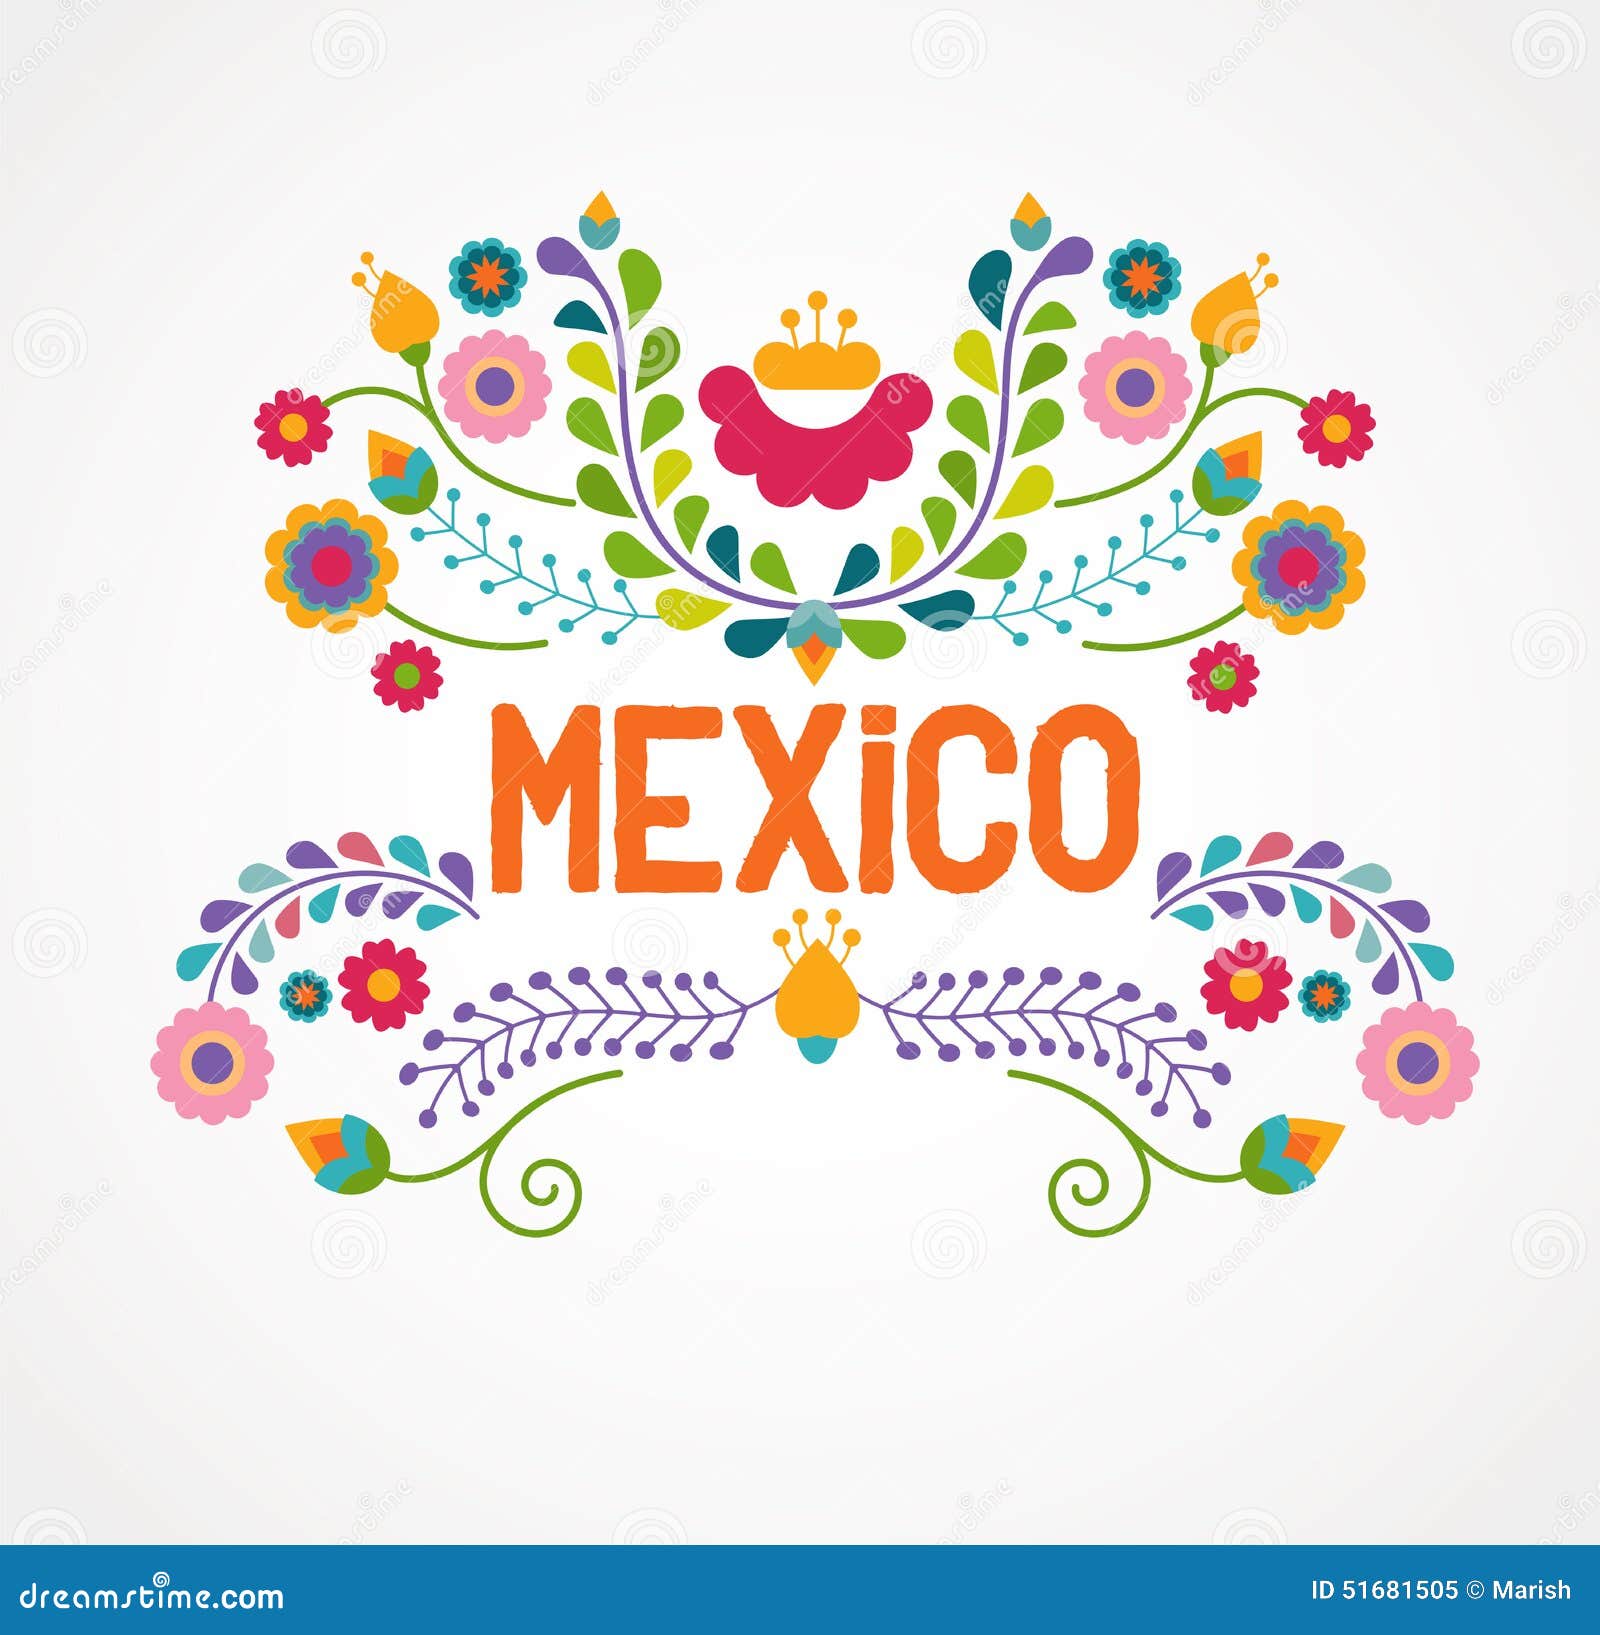 free vector mexican clipart - photo #38